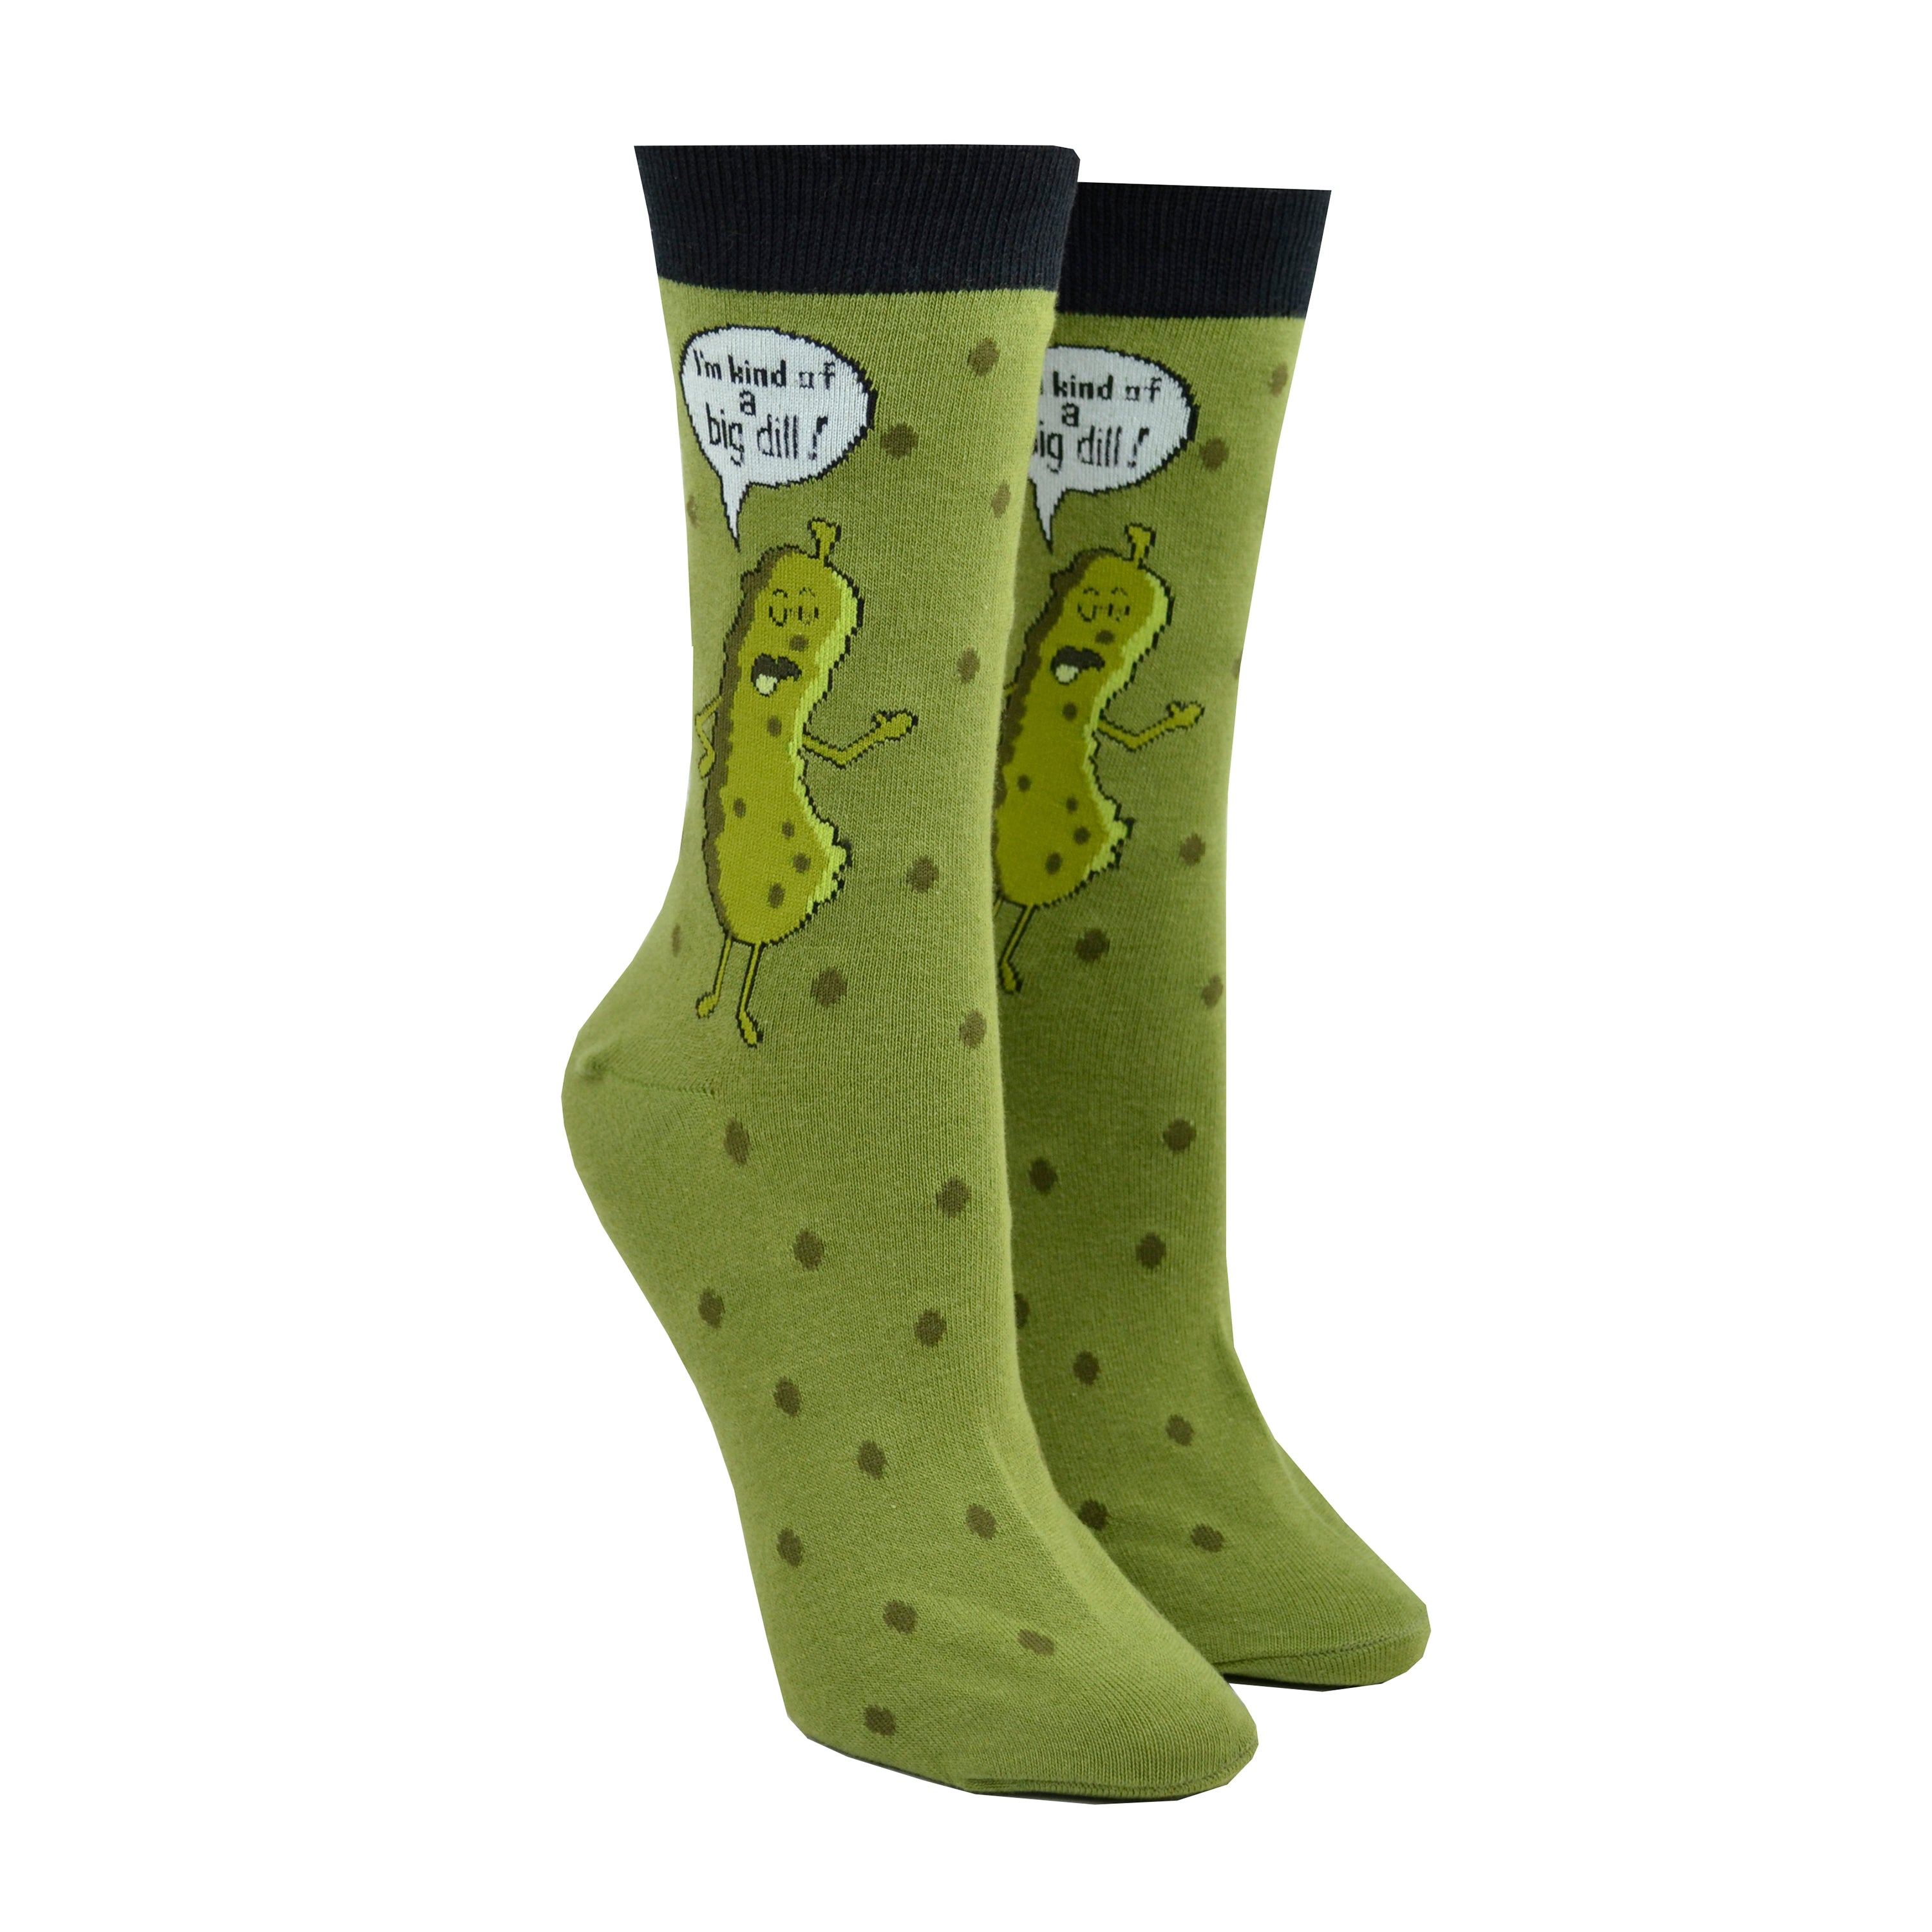 Shown on a leg form, these green cotton funny women's crew socks with a black cuff by the brand Foot Traffic have a picture of a talking dill pickle on them and a word bubble that says 